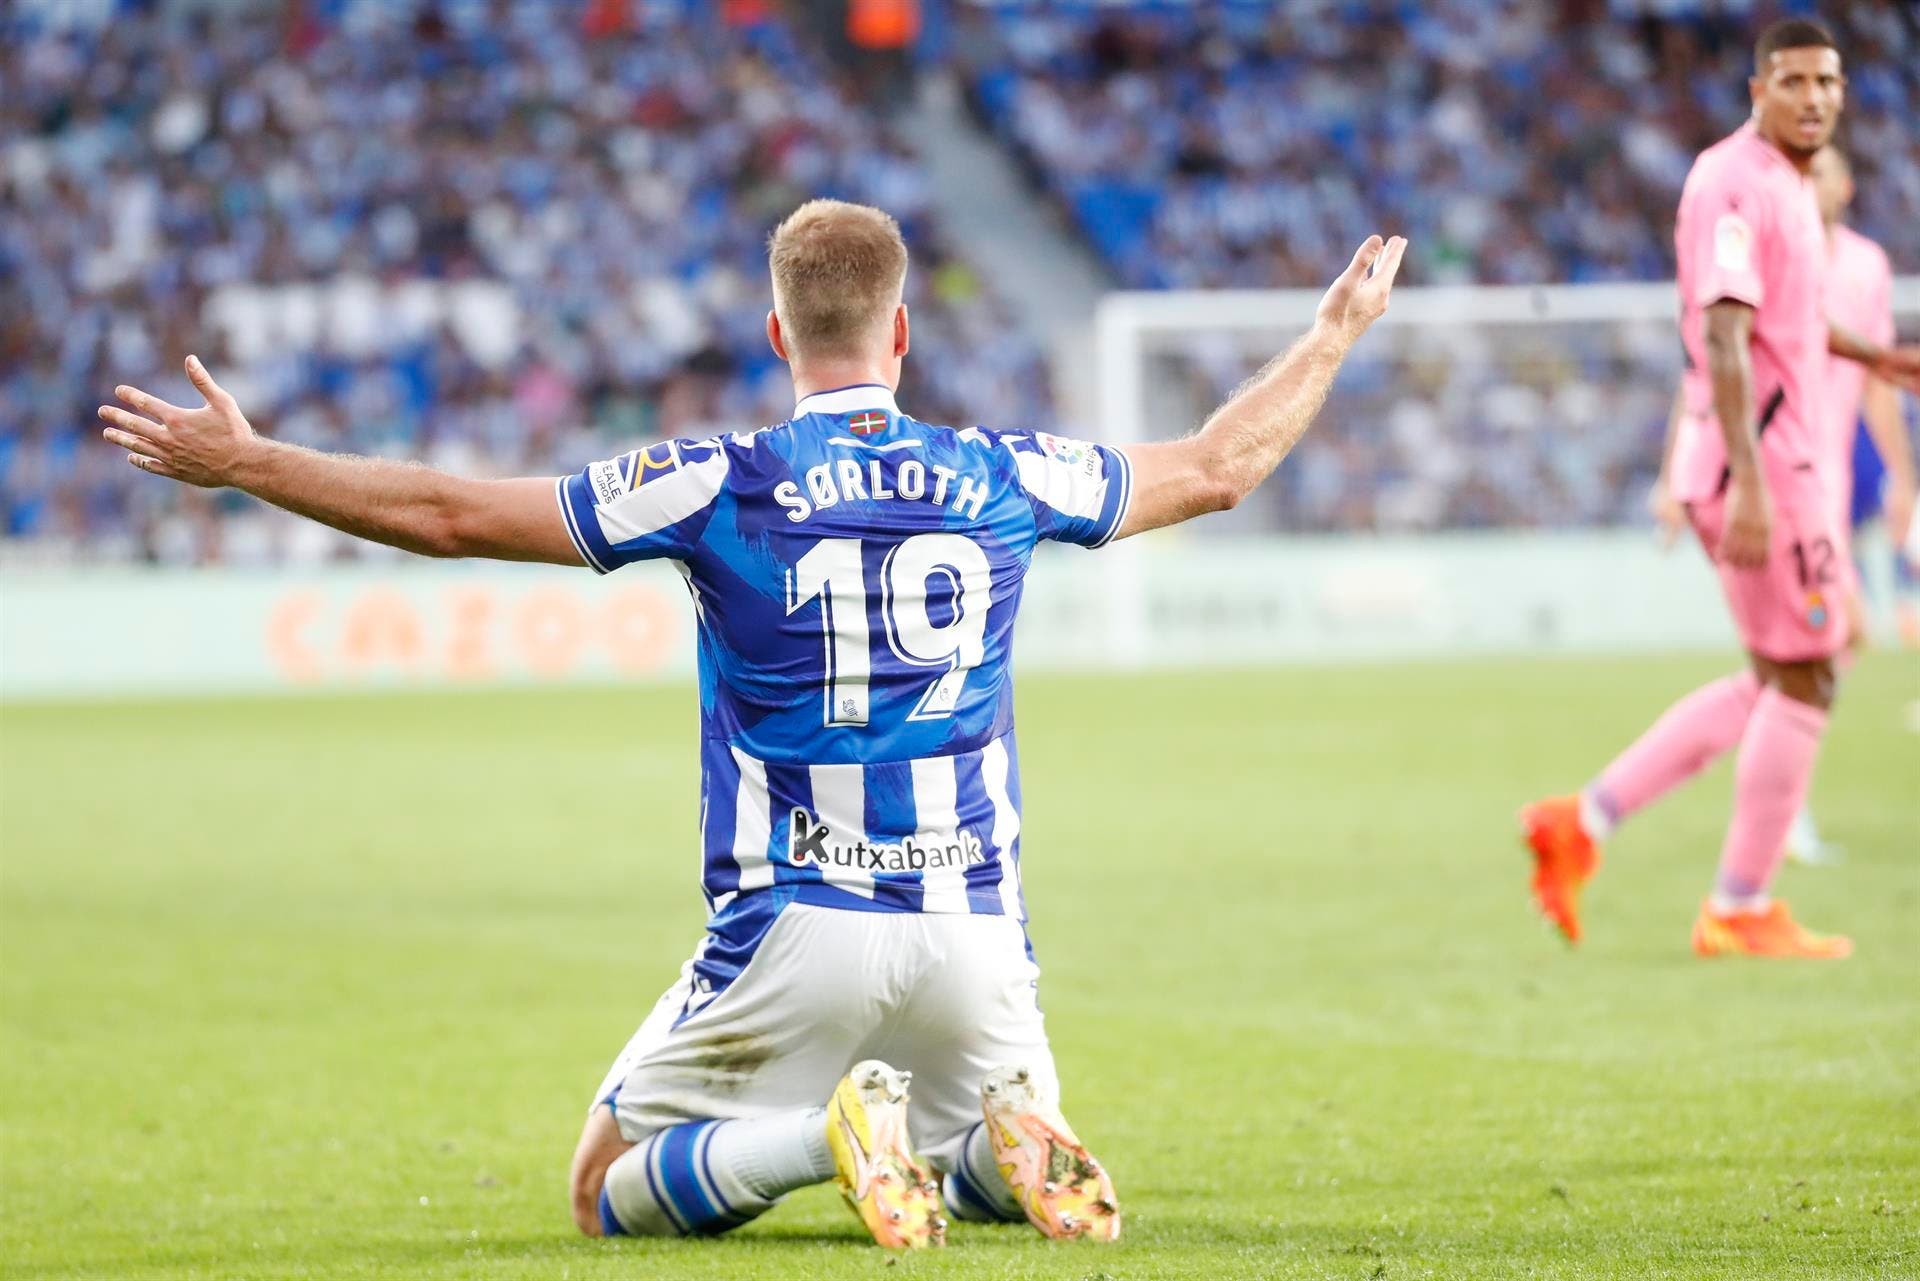 Real Sociedad's plan to line up with Sorloth
